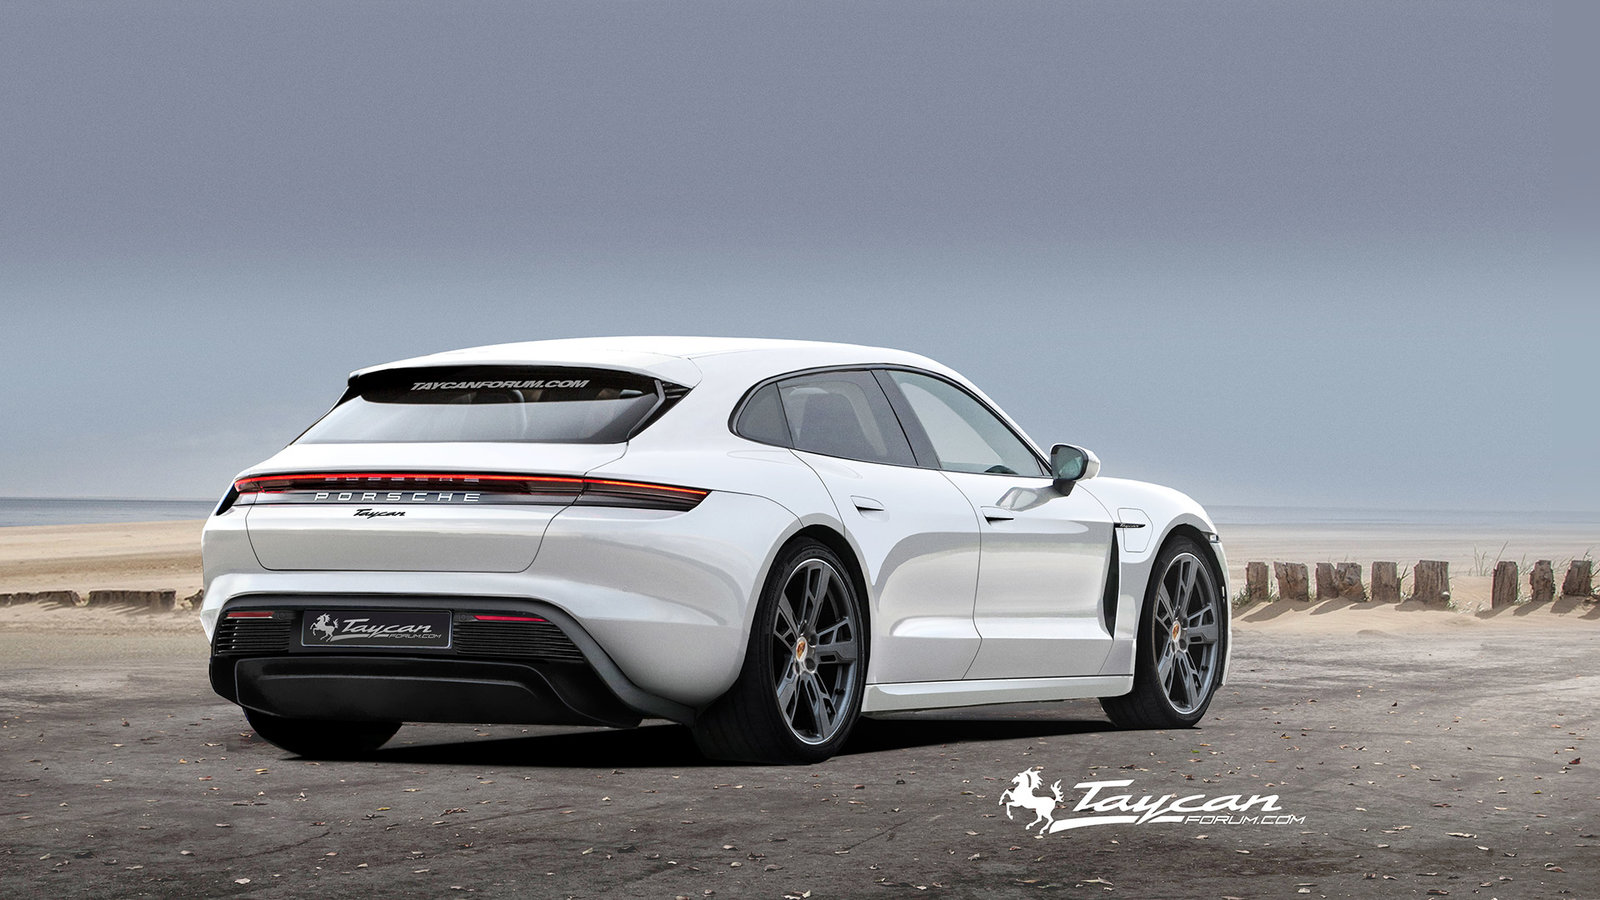 Porsche Taycan Here's what the Taycan Targa and Sport Turismo versions could look like! PorscheTaycan_SportTurismo_white_rear